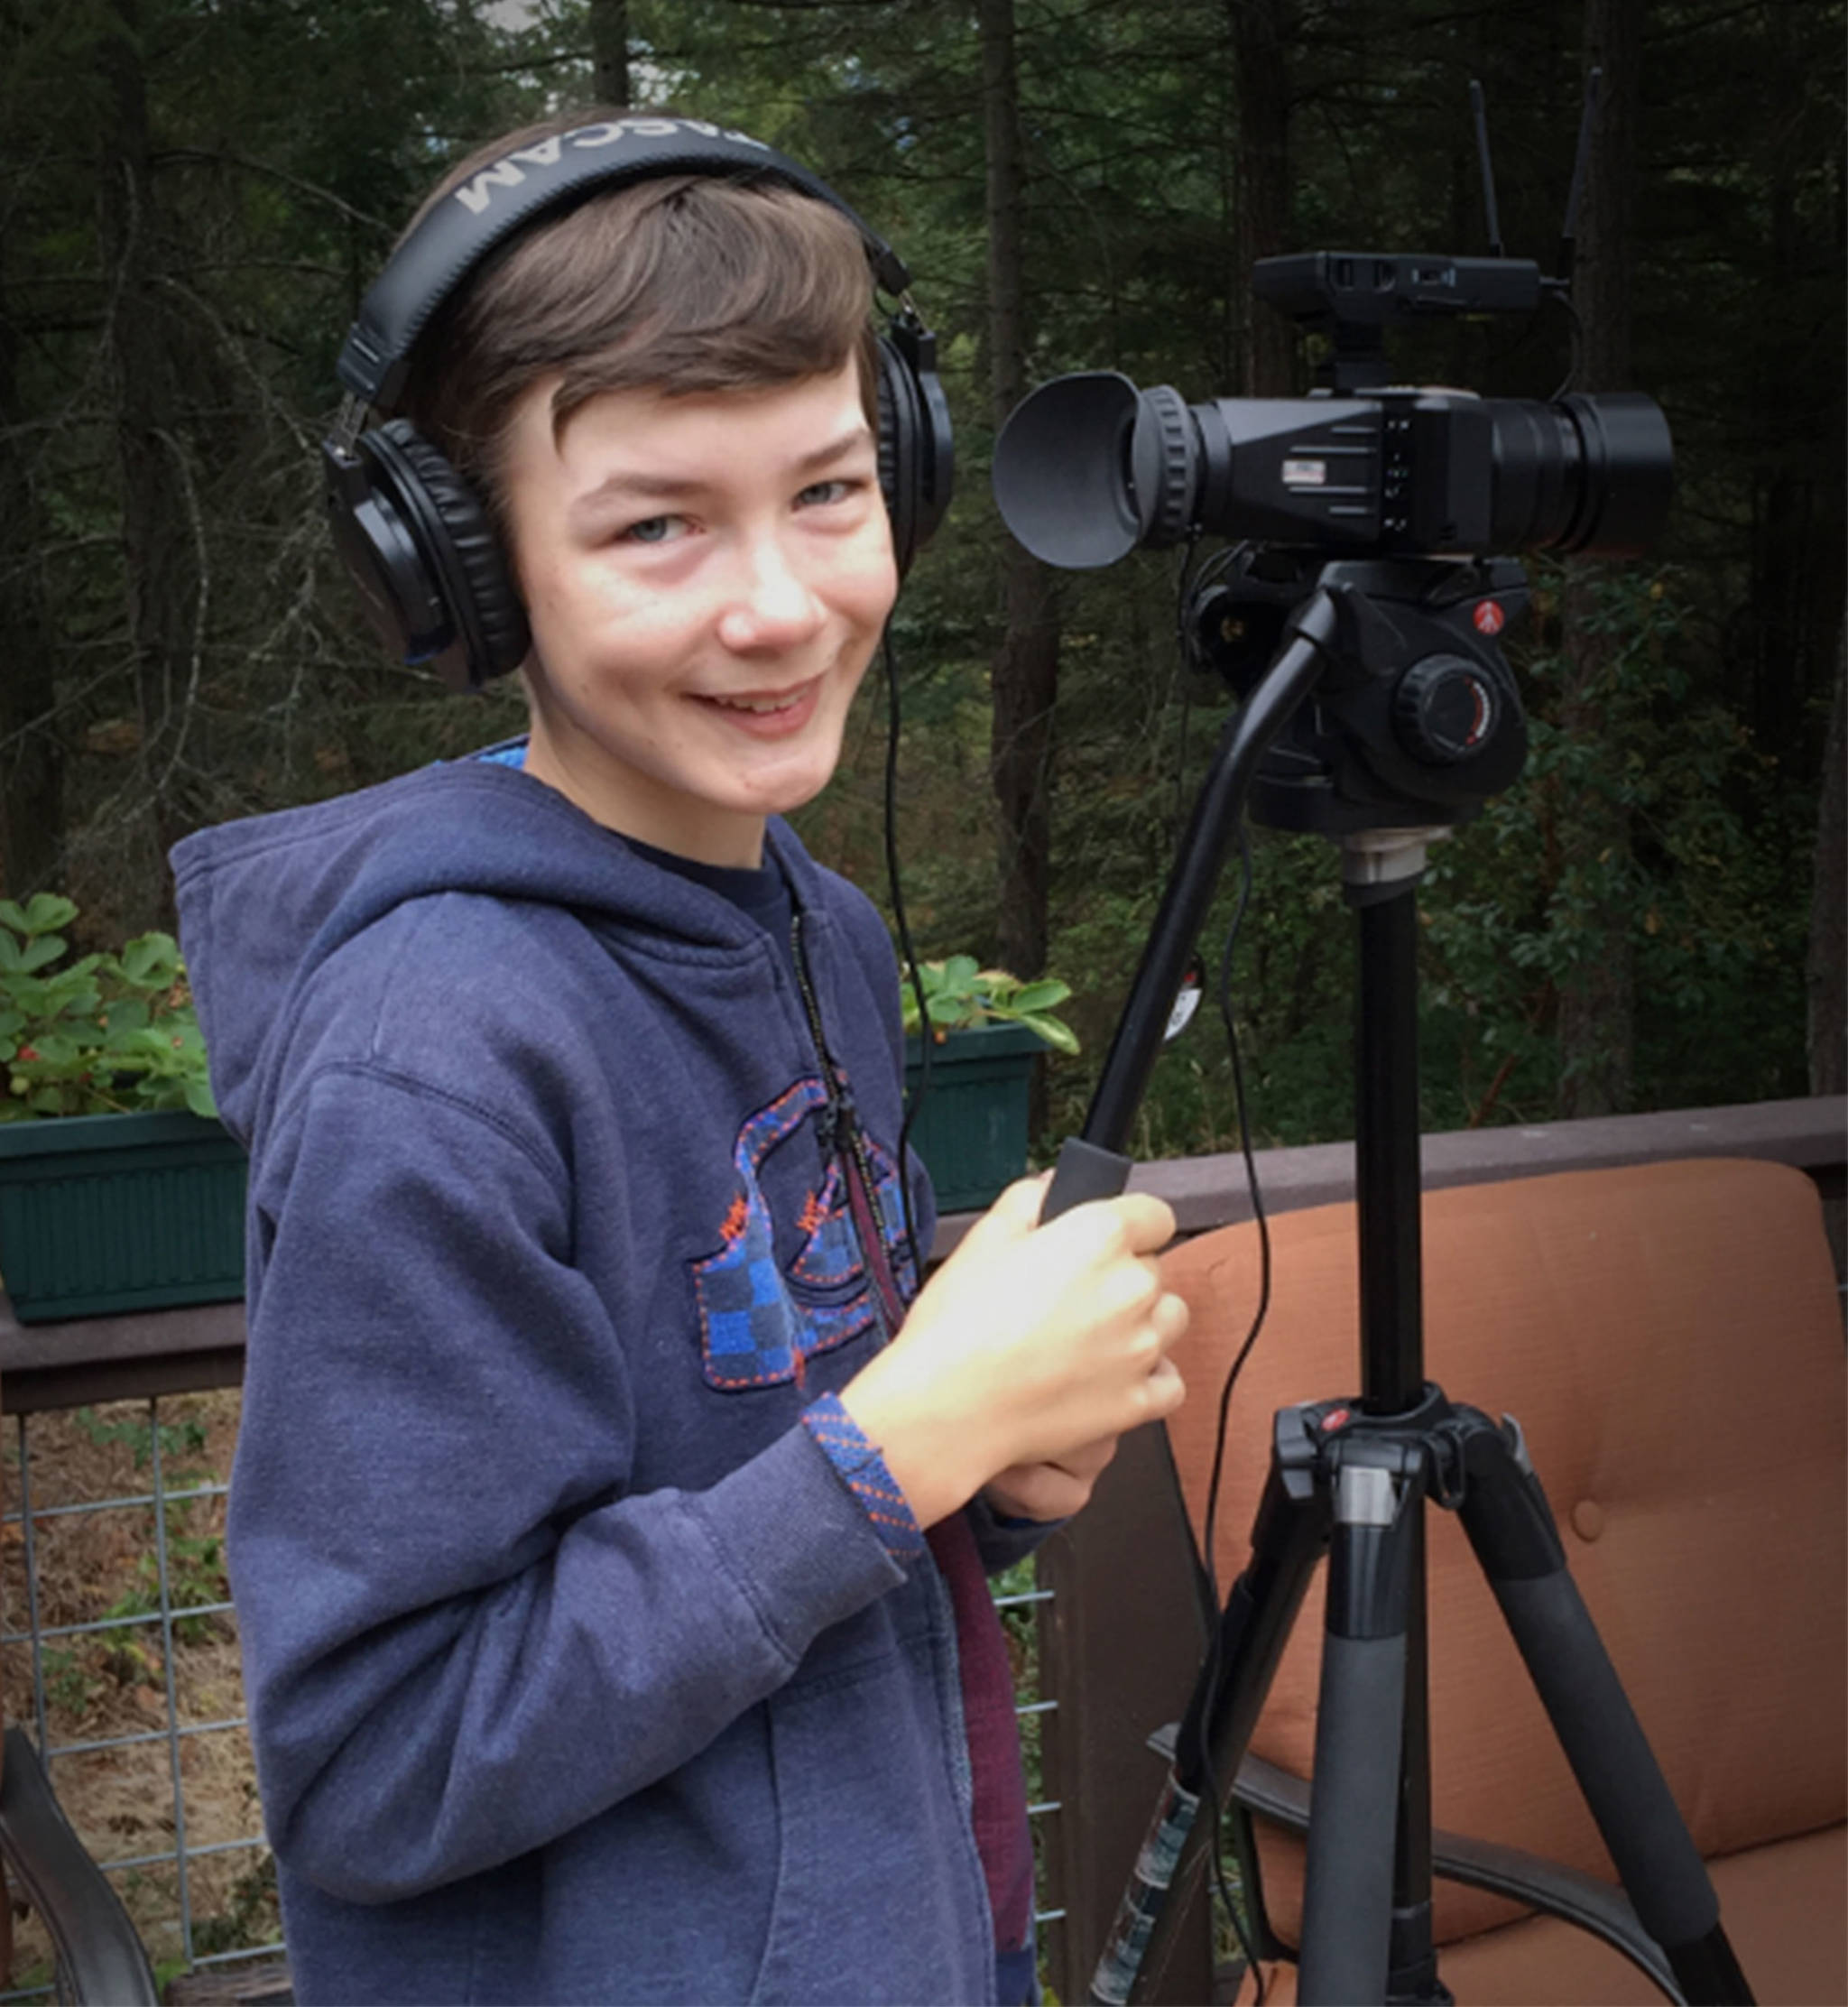 Teen filmmaker to show his work at Vashon Earth Day Celebration